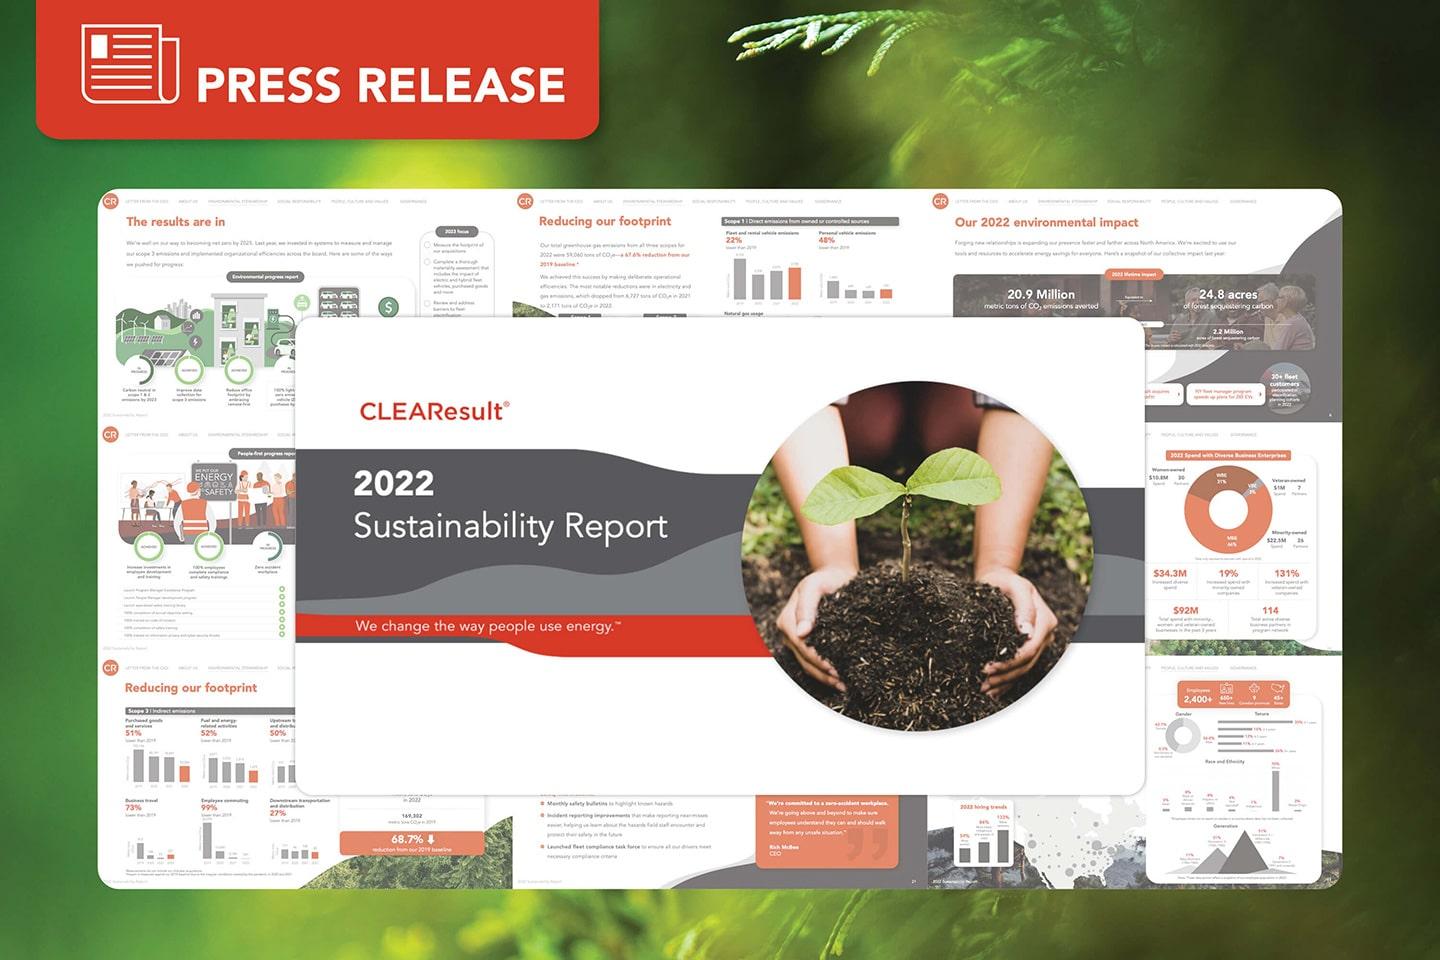 CLEAResult 2022 Corporate Sustainability Report